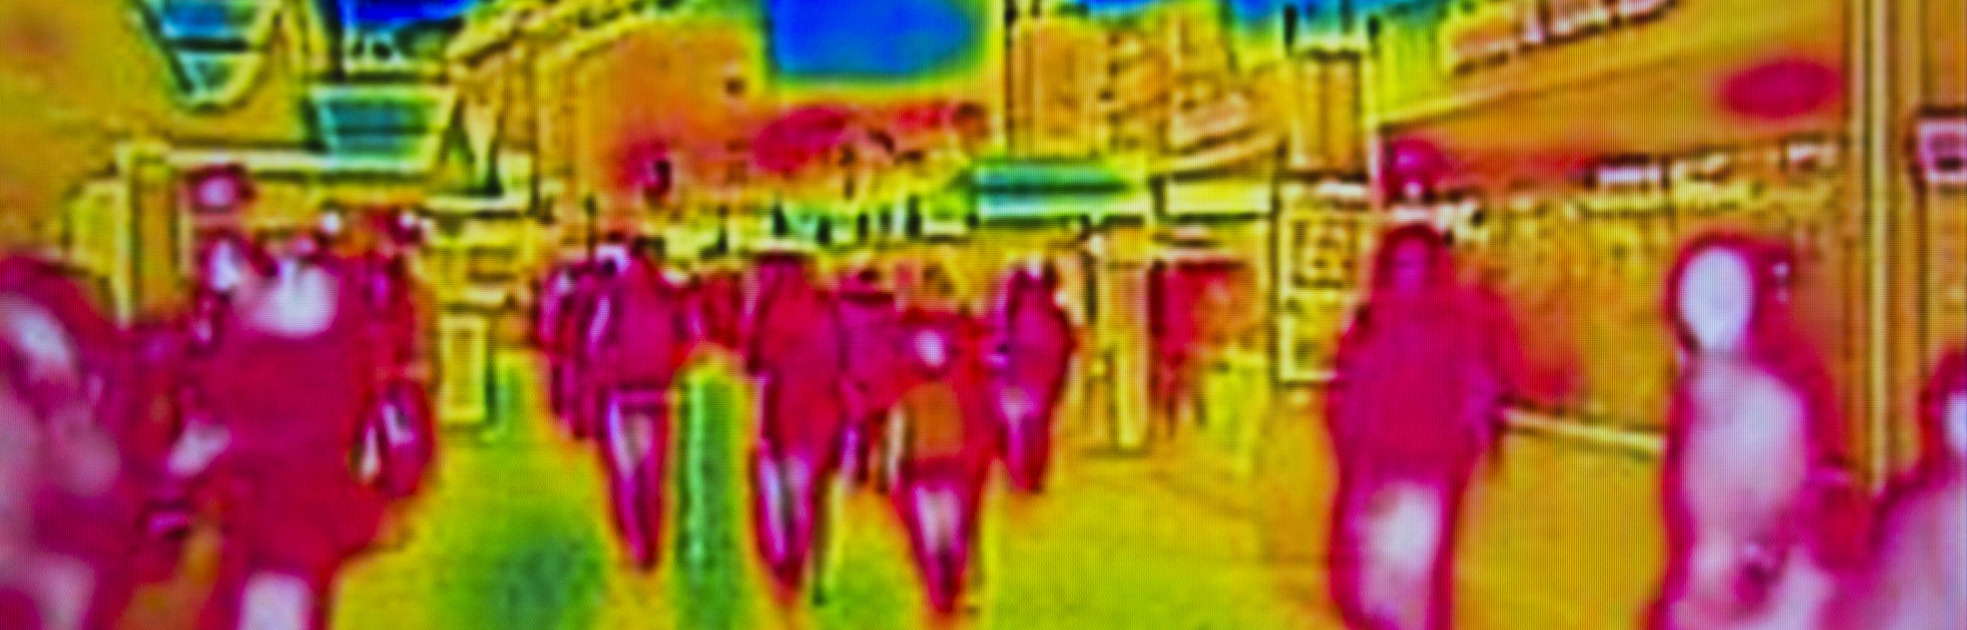 infrared image of people on street